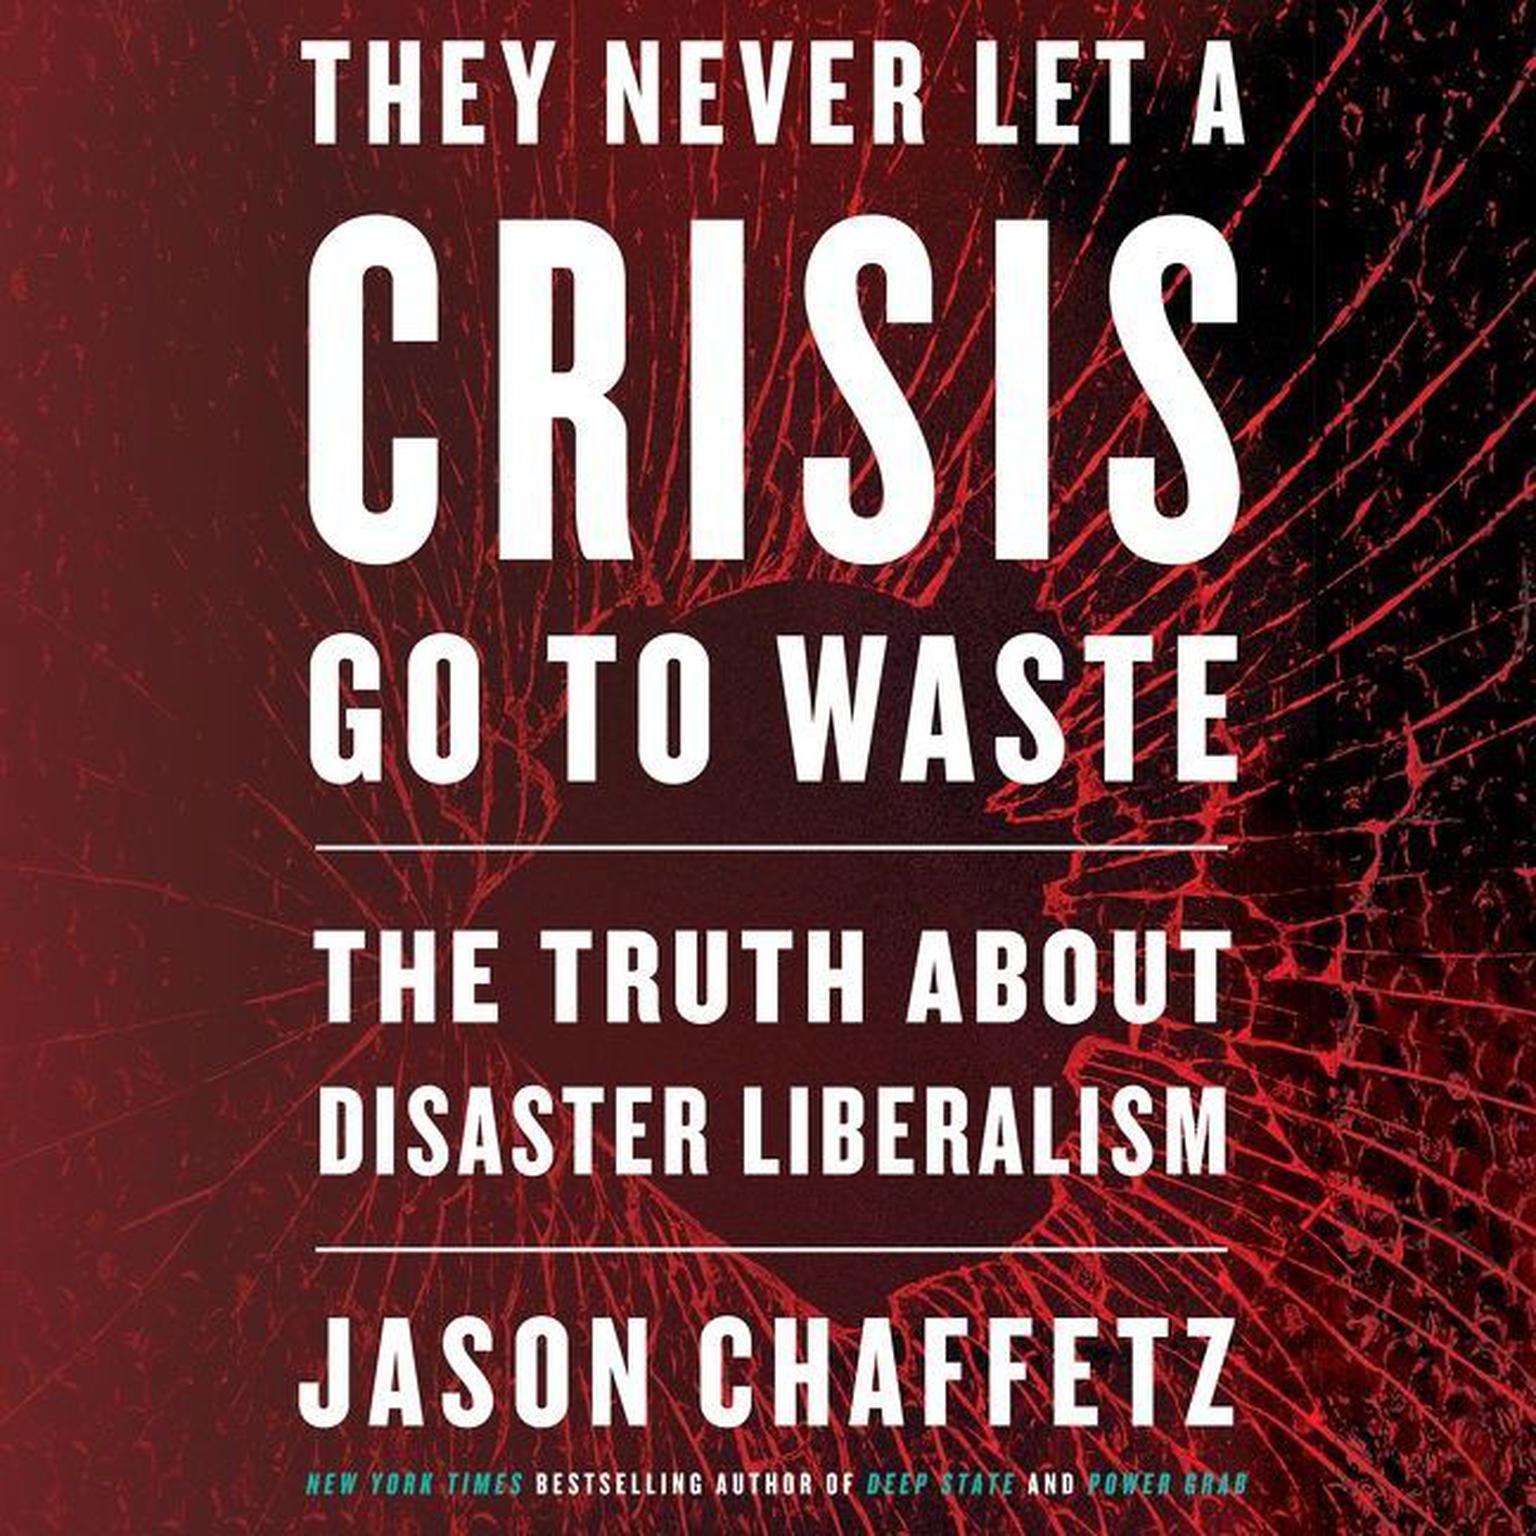 They Never Let a Crisis Go to Waste: The Truth About Disaster Liberalism Audiobook, by Jason Chaffetz